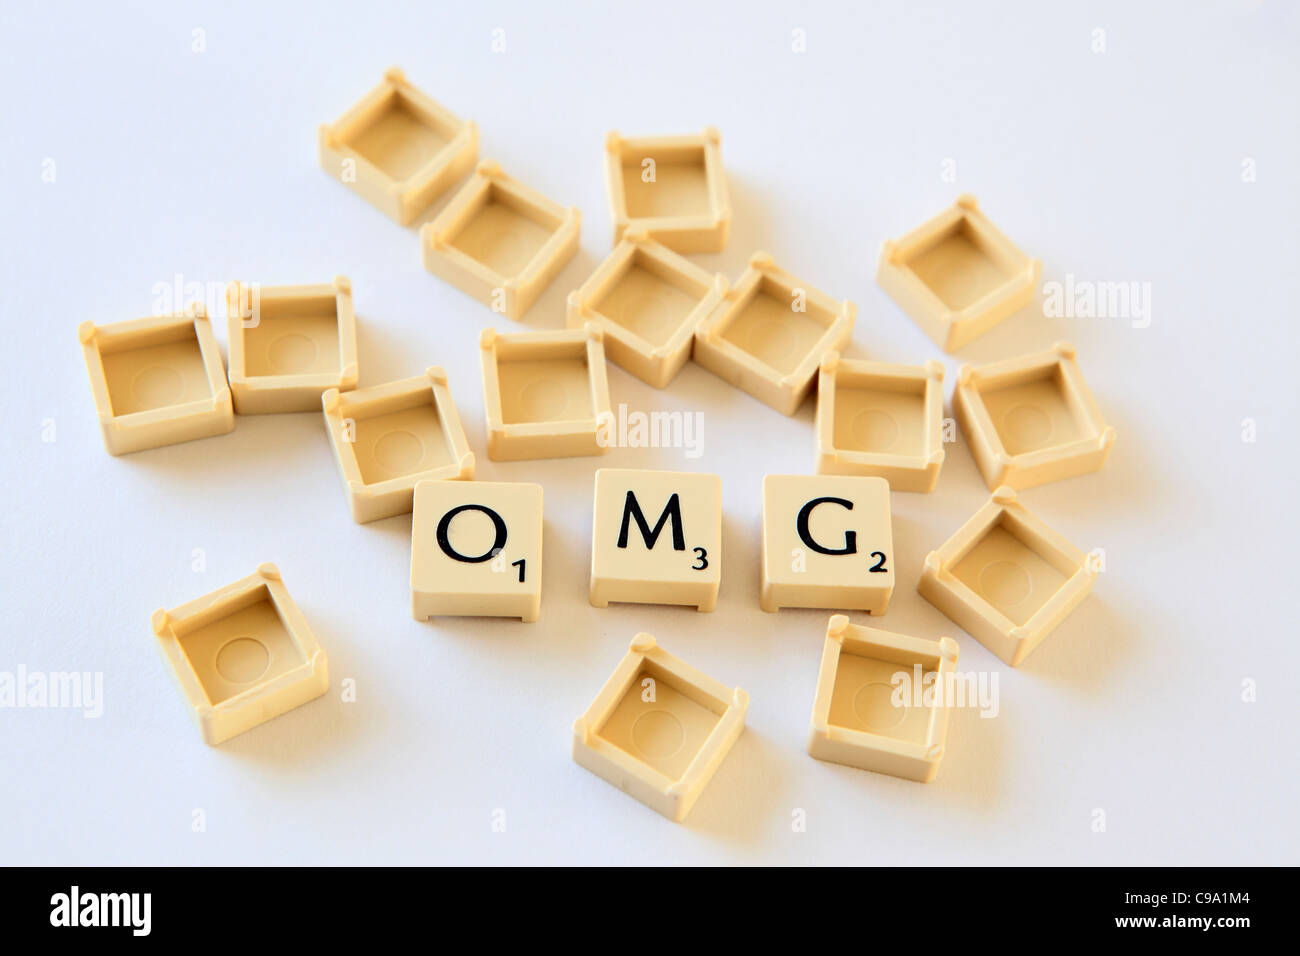 "OMG" spelled out in Scrabble letter tiles squares, sland txt texting chat speak, studio photograph Stock Photo